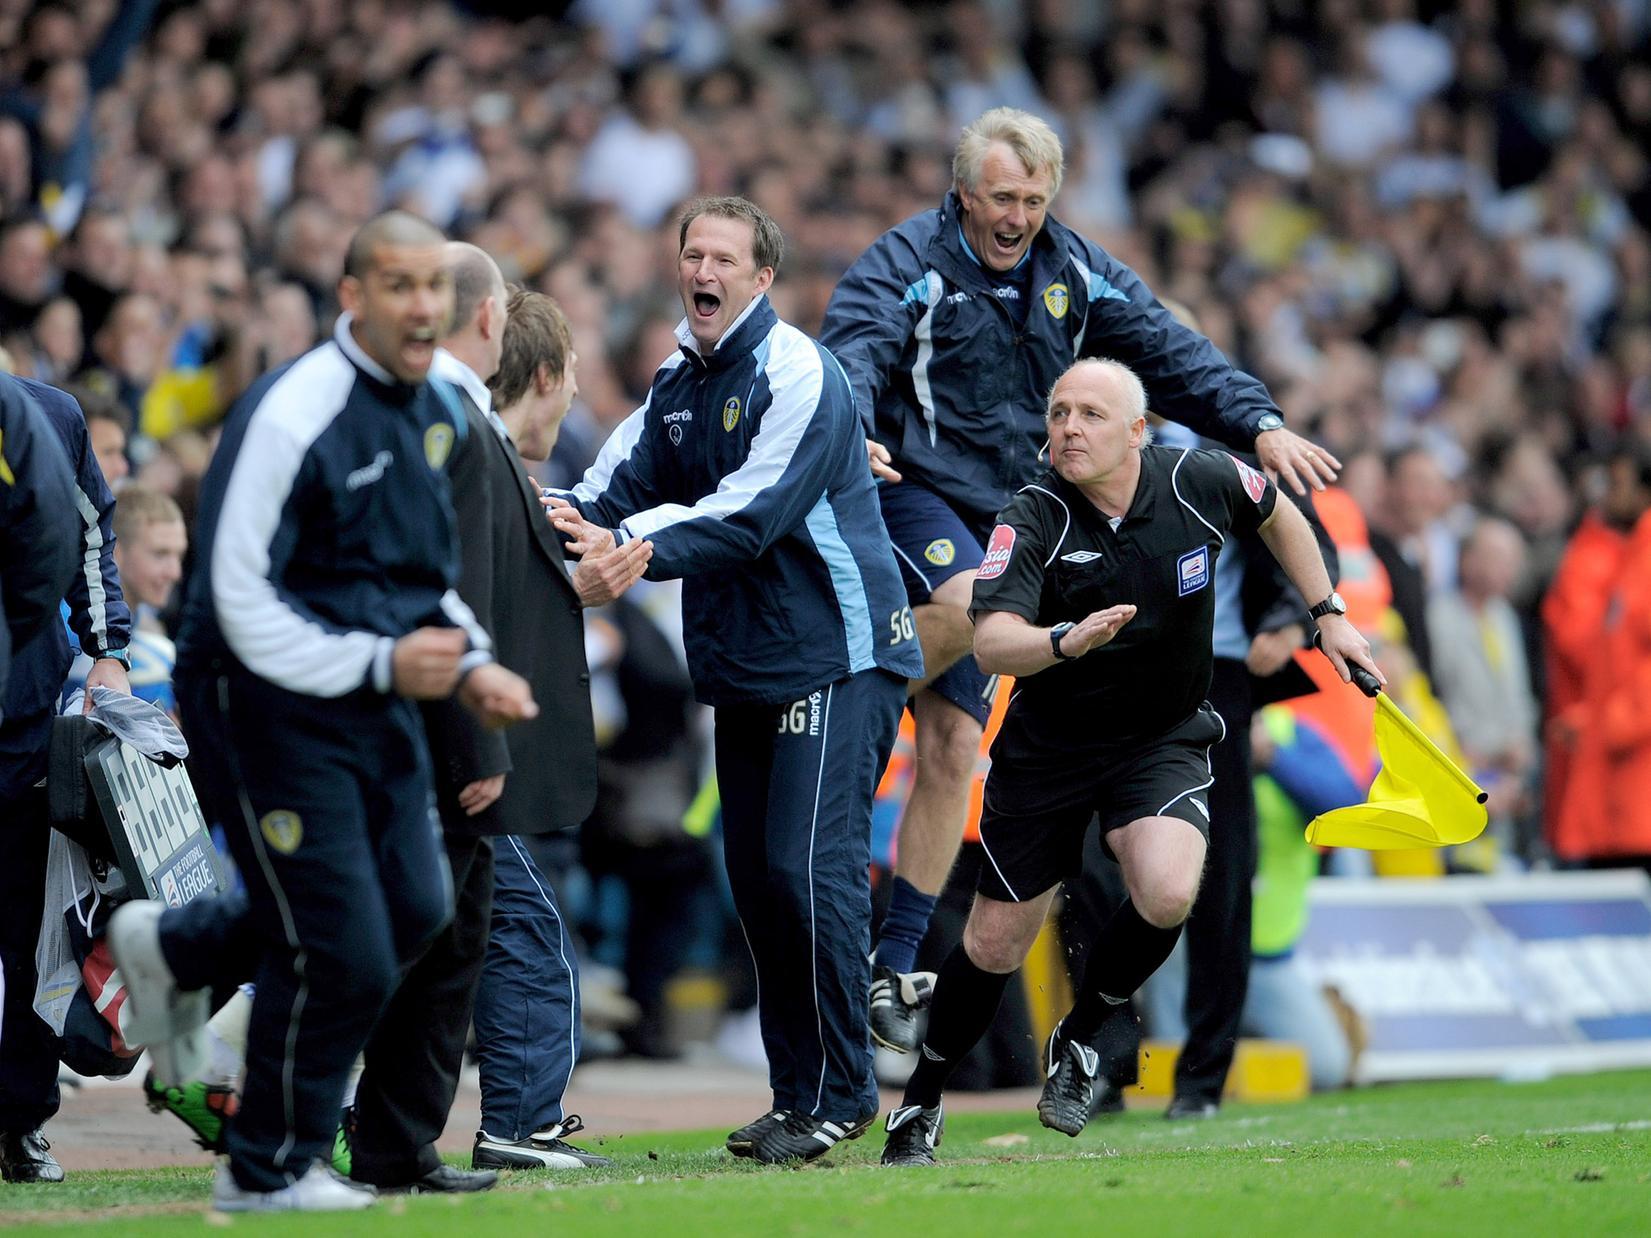 How many Leeds players from the start of the decade can you remember?